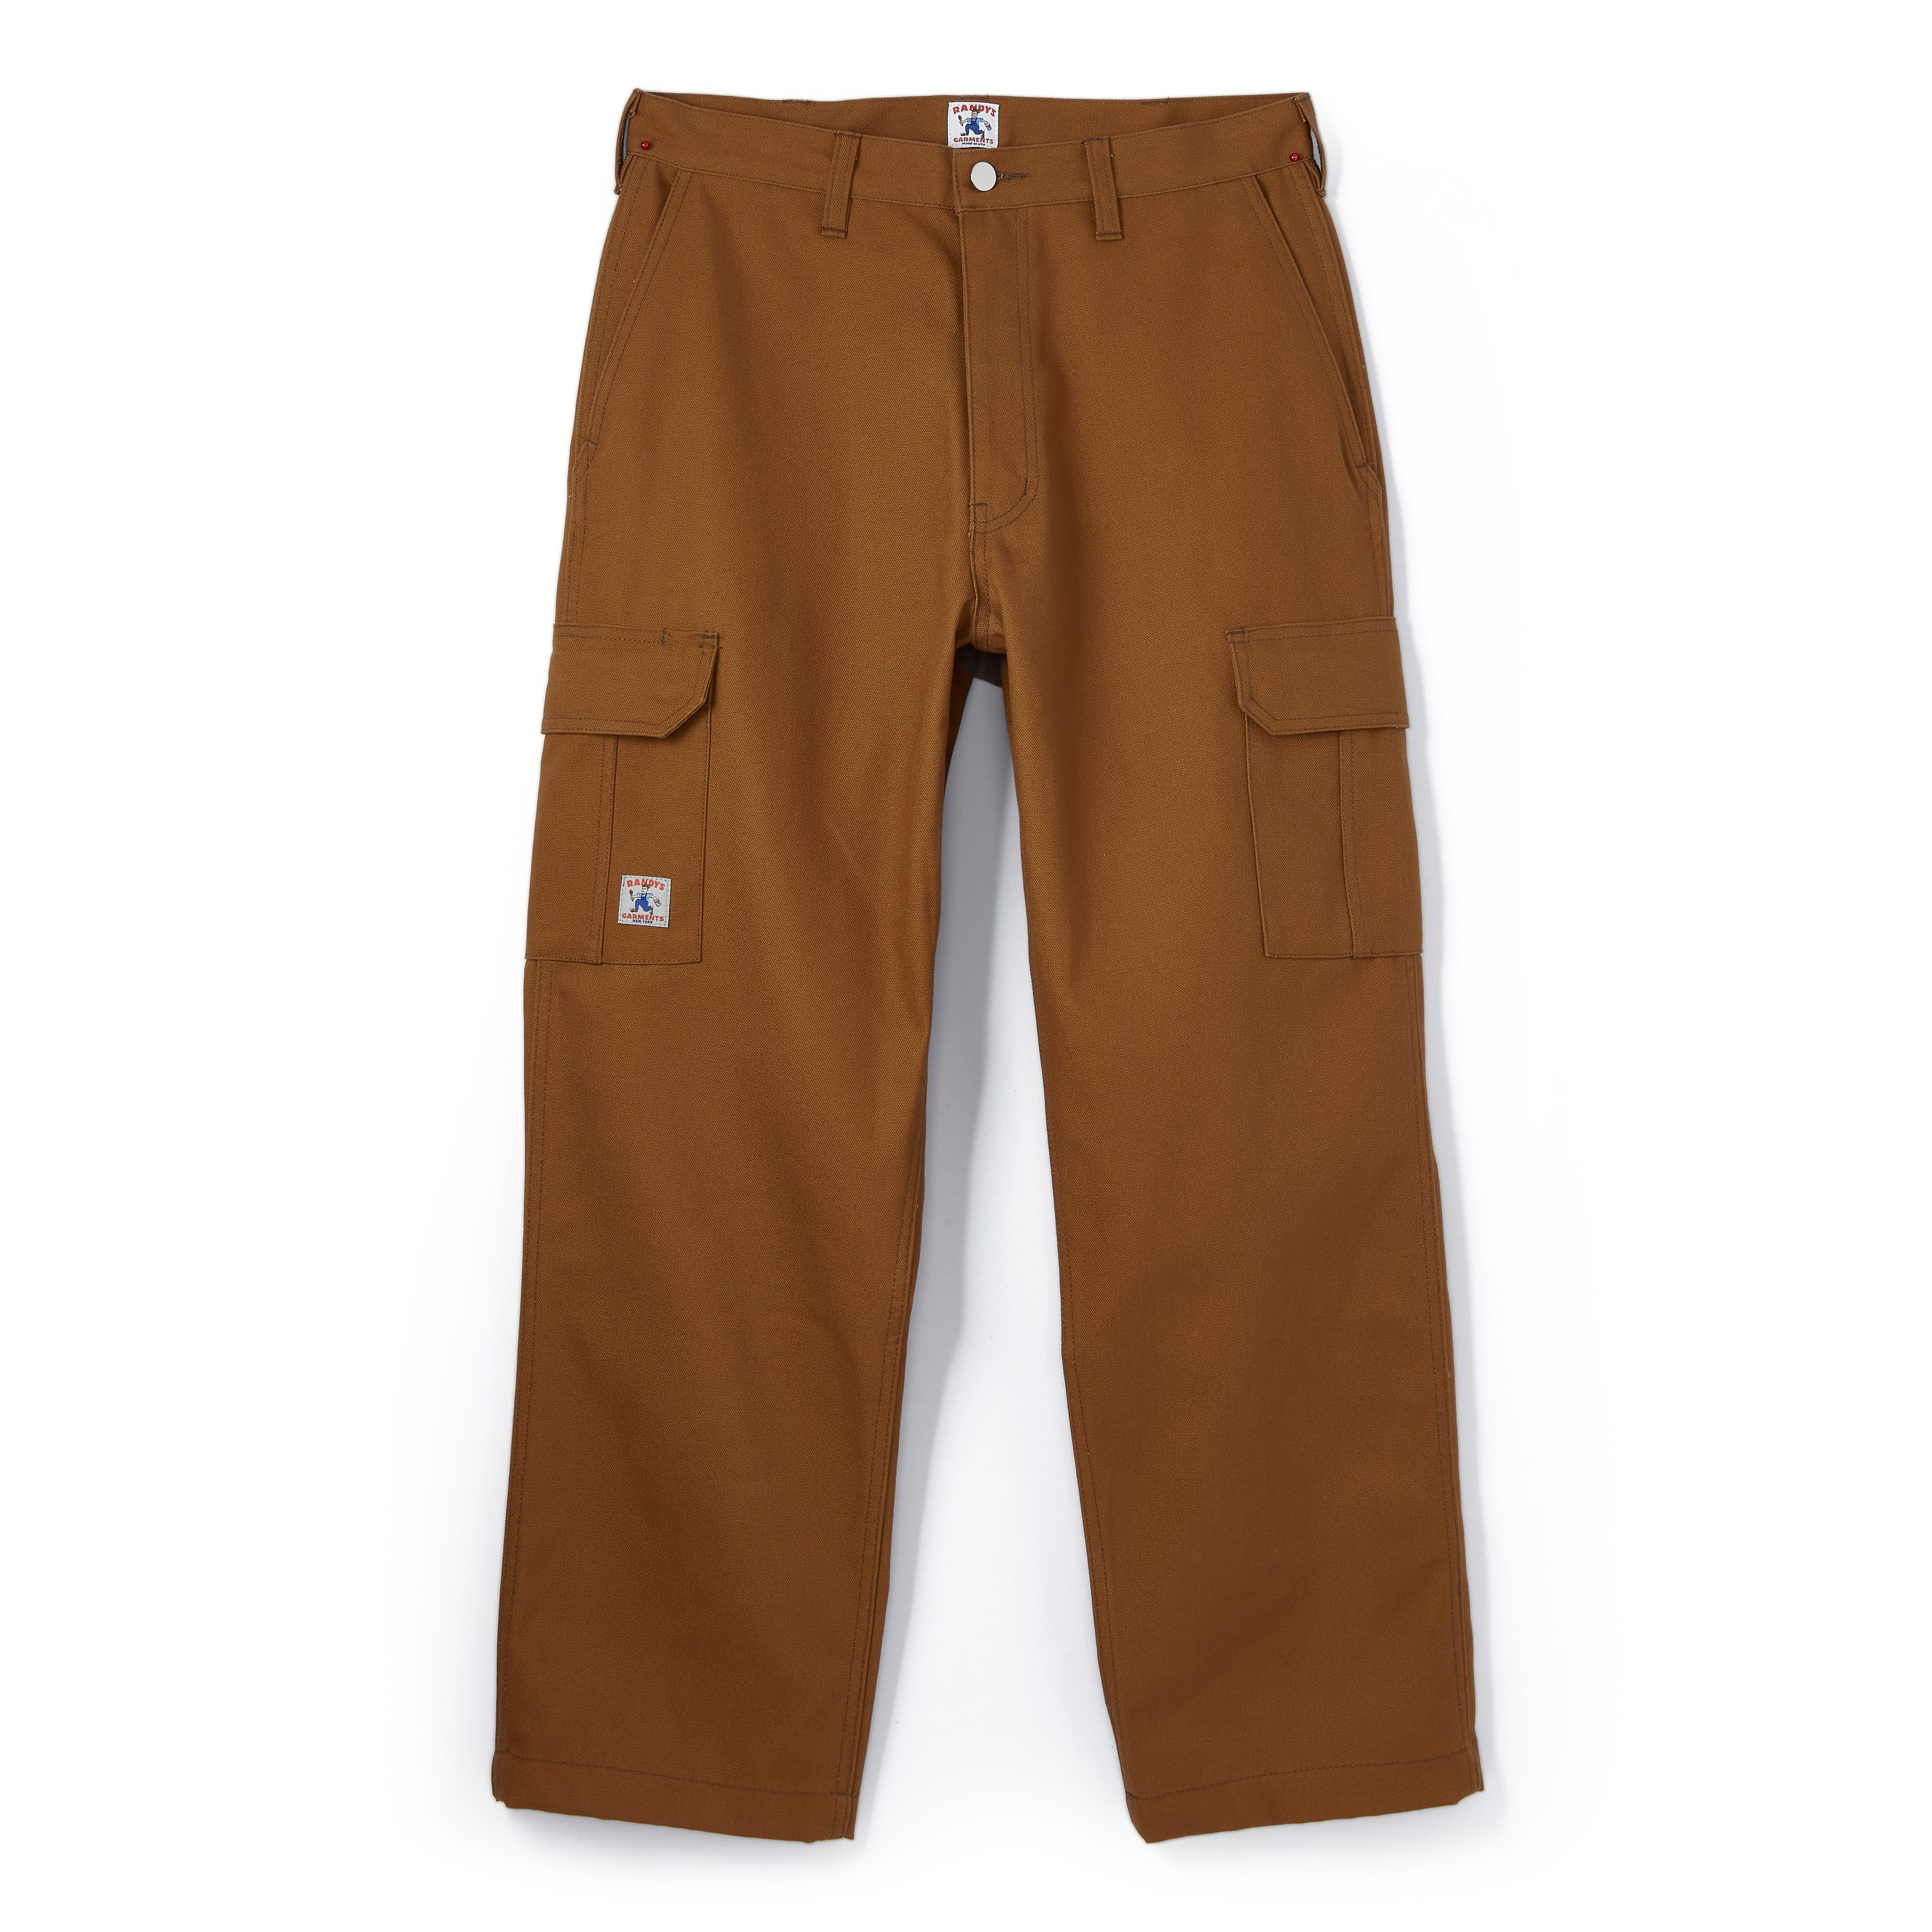 Heavy Twill Tapered Gusseted Work Pant - Randy's Garments